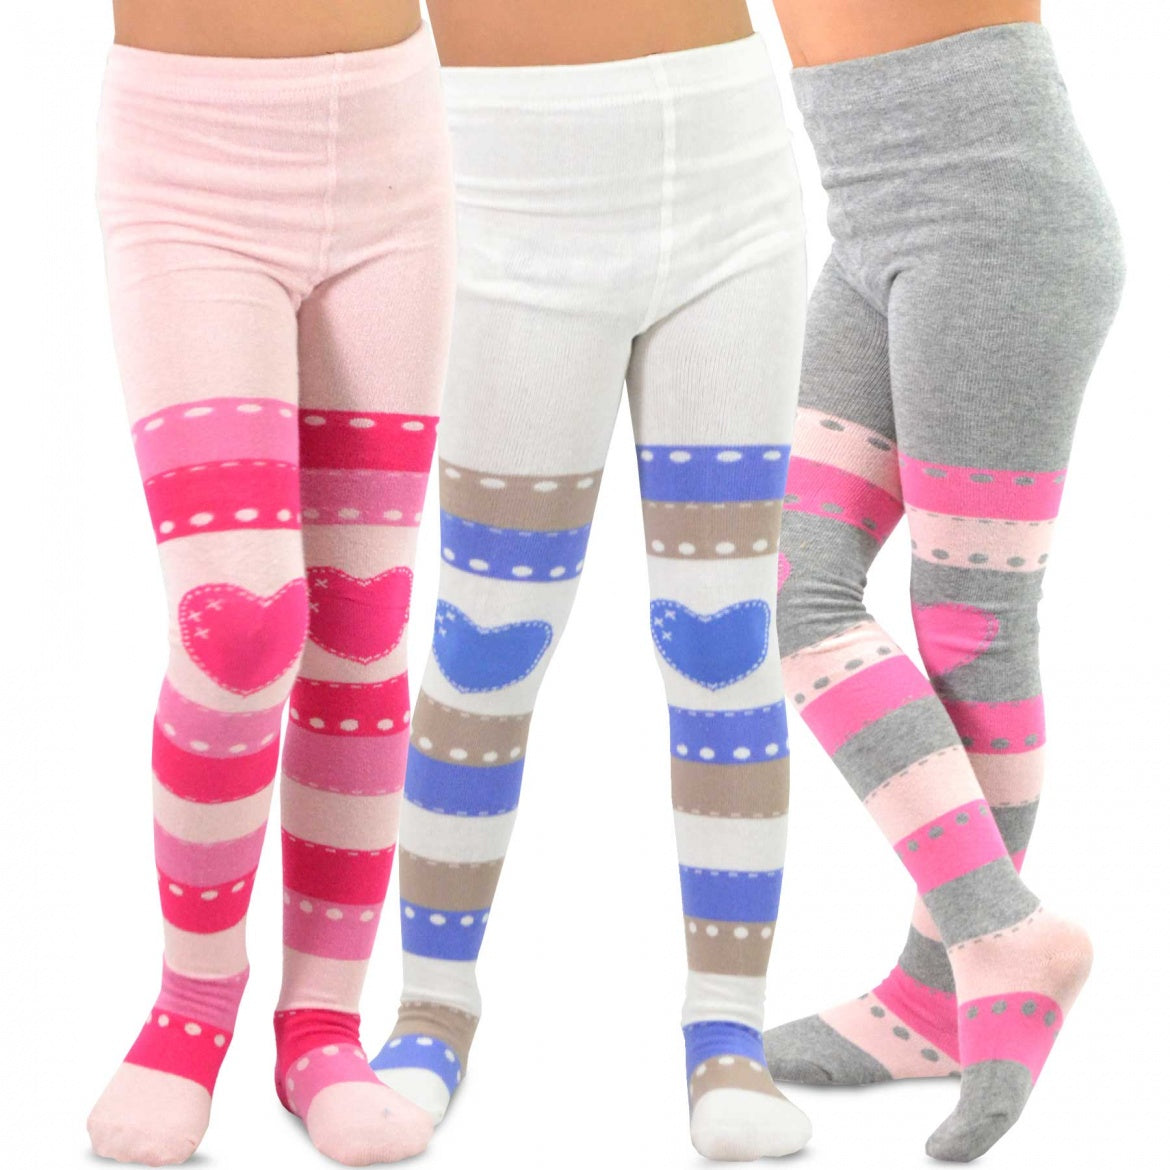 TeeHee Socks Kid's Casual Cotton Tights Stripes with Hearts 3-Pack (70